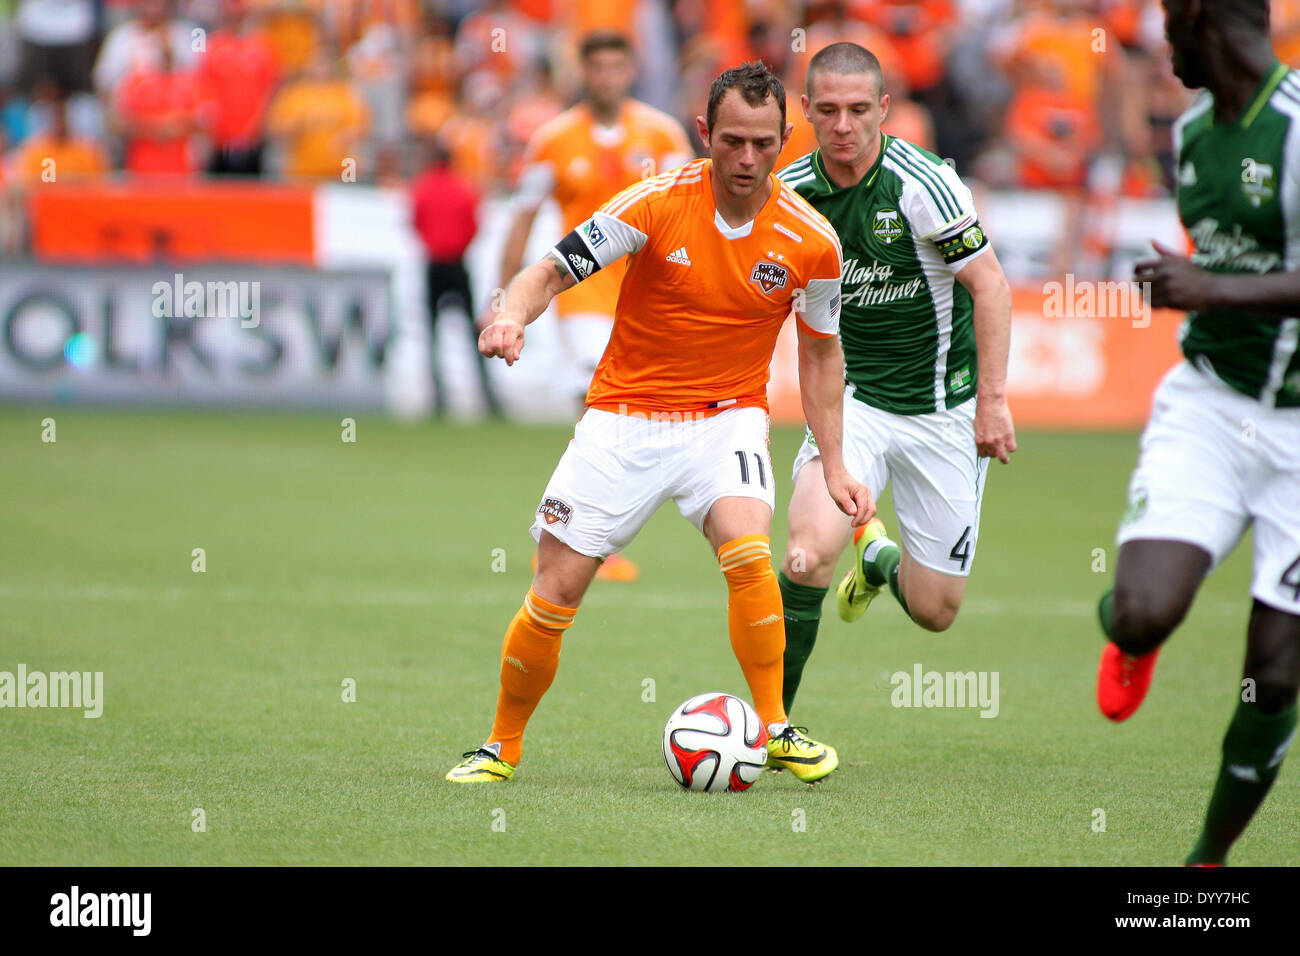 Houston, Texas, USA. 27th Apr, 2014. APR 27 2014: Houston Dynamo midfielder Brad Davis #11 plays the ball forward during the MLS soccer match between the Houston Dynamo and the Portland Timbers from BBVA Compass Stadium in Houston, TX. The match ended in a 1-1 draw. Credit:  csm/Alamy Live News Stock Photo